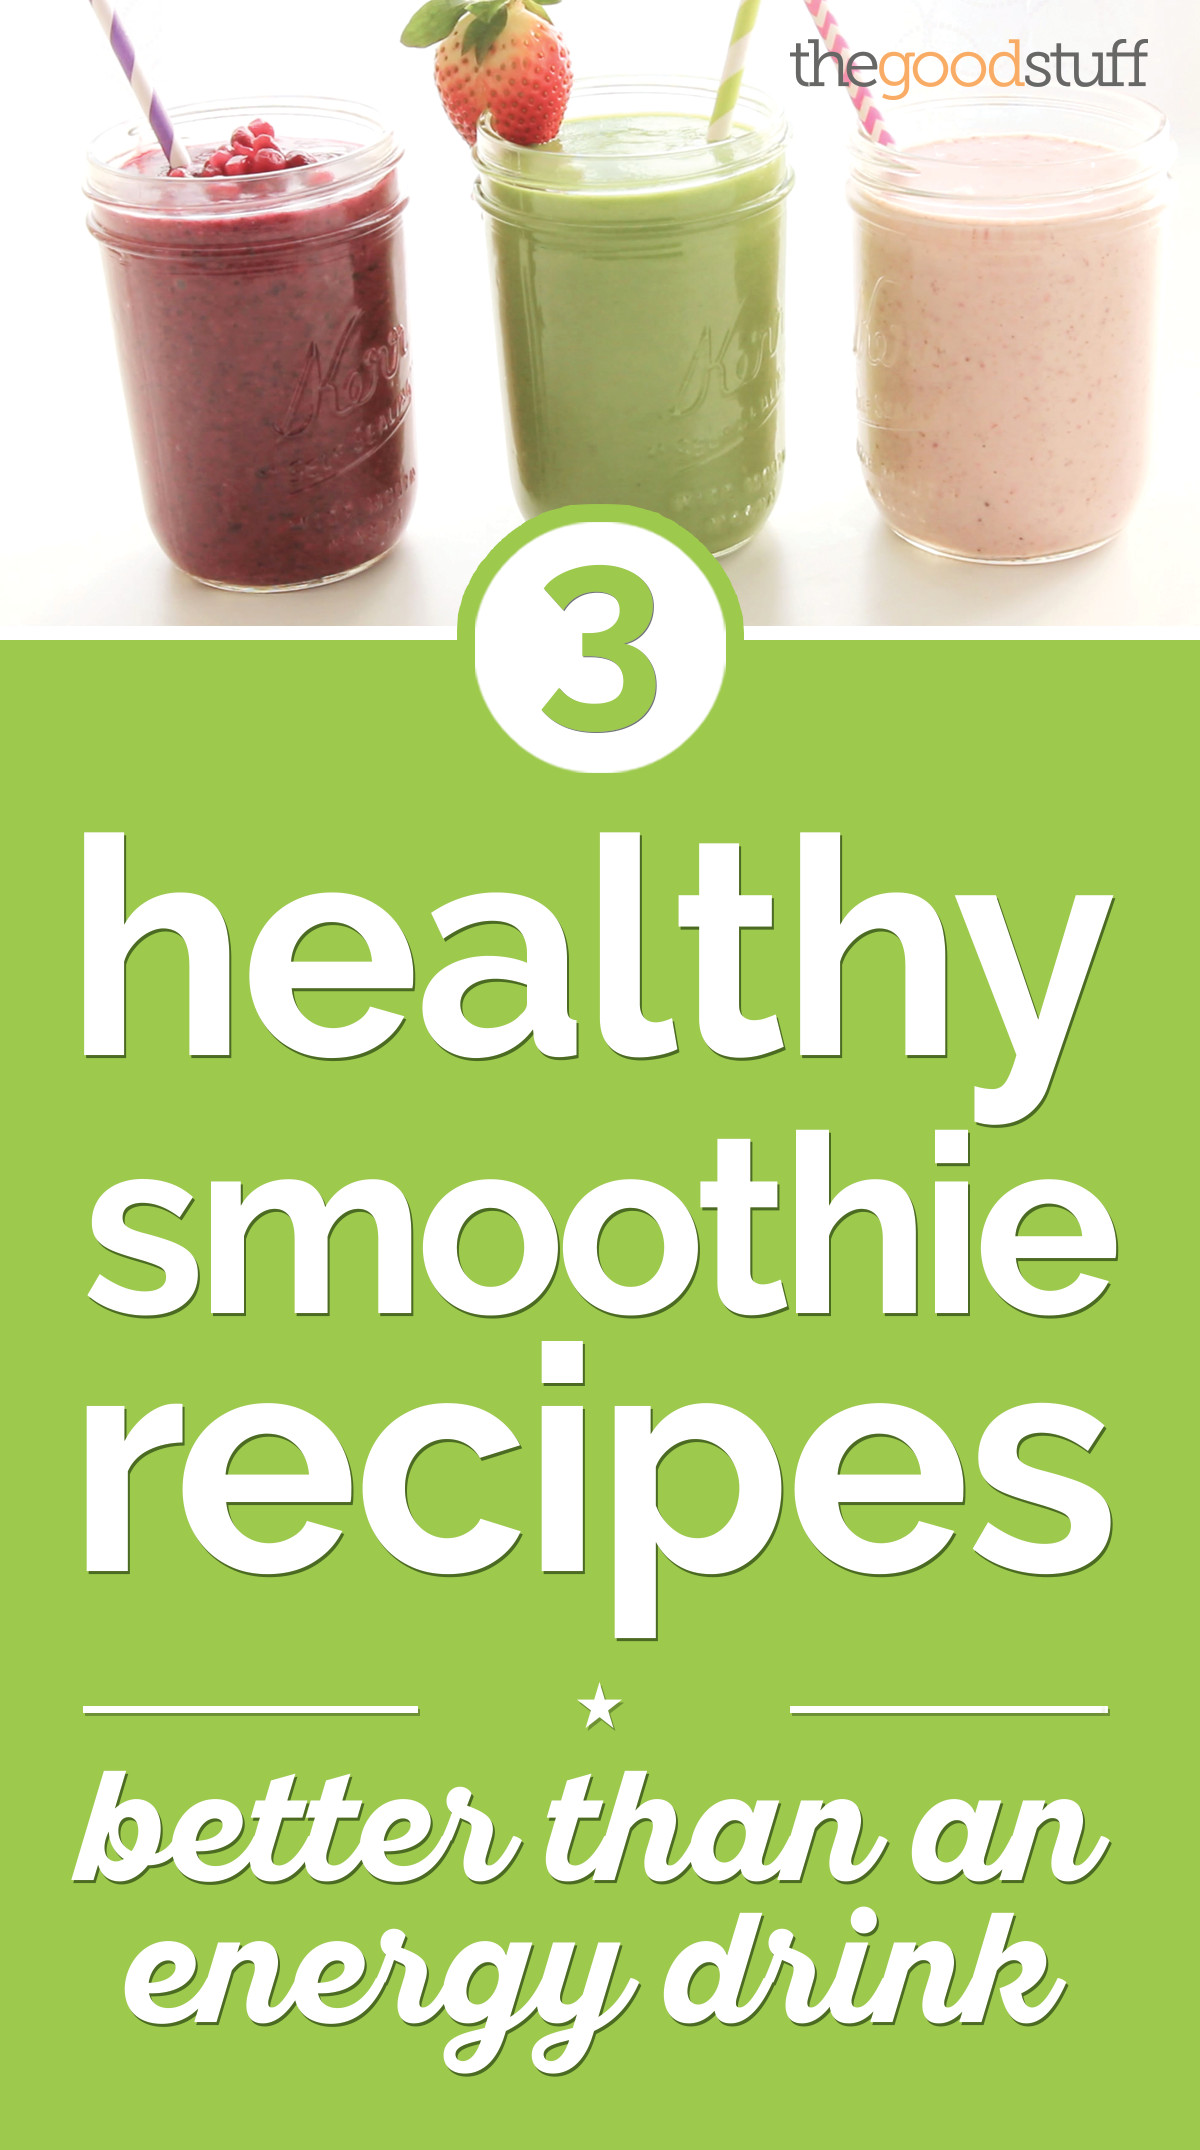 Healthy Energy Smoothie Recipes
 3 Healthy Smoothie Recipes Better Than an Energy Drink